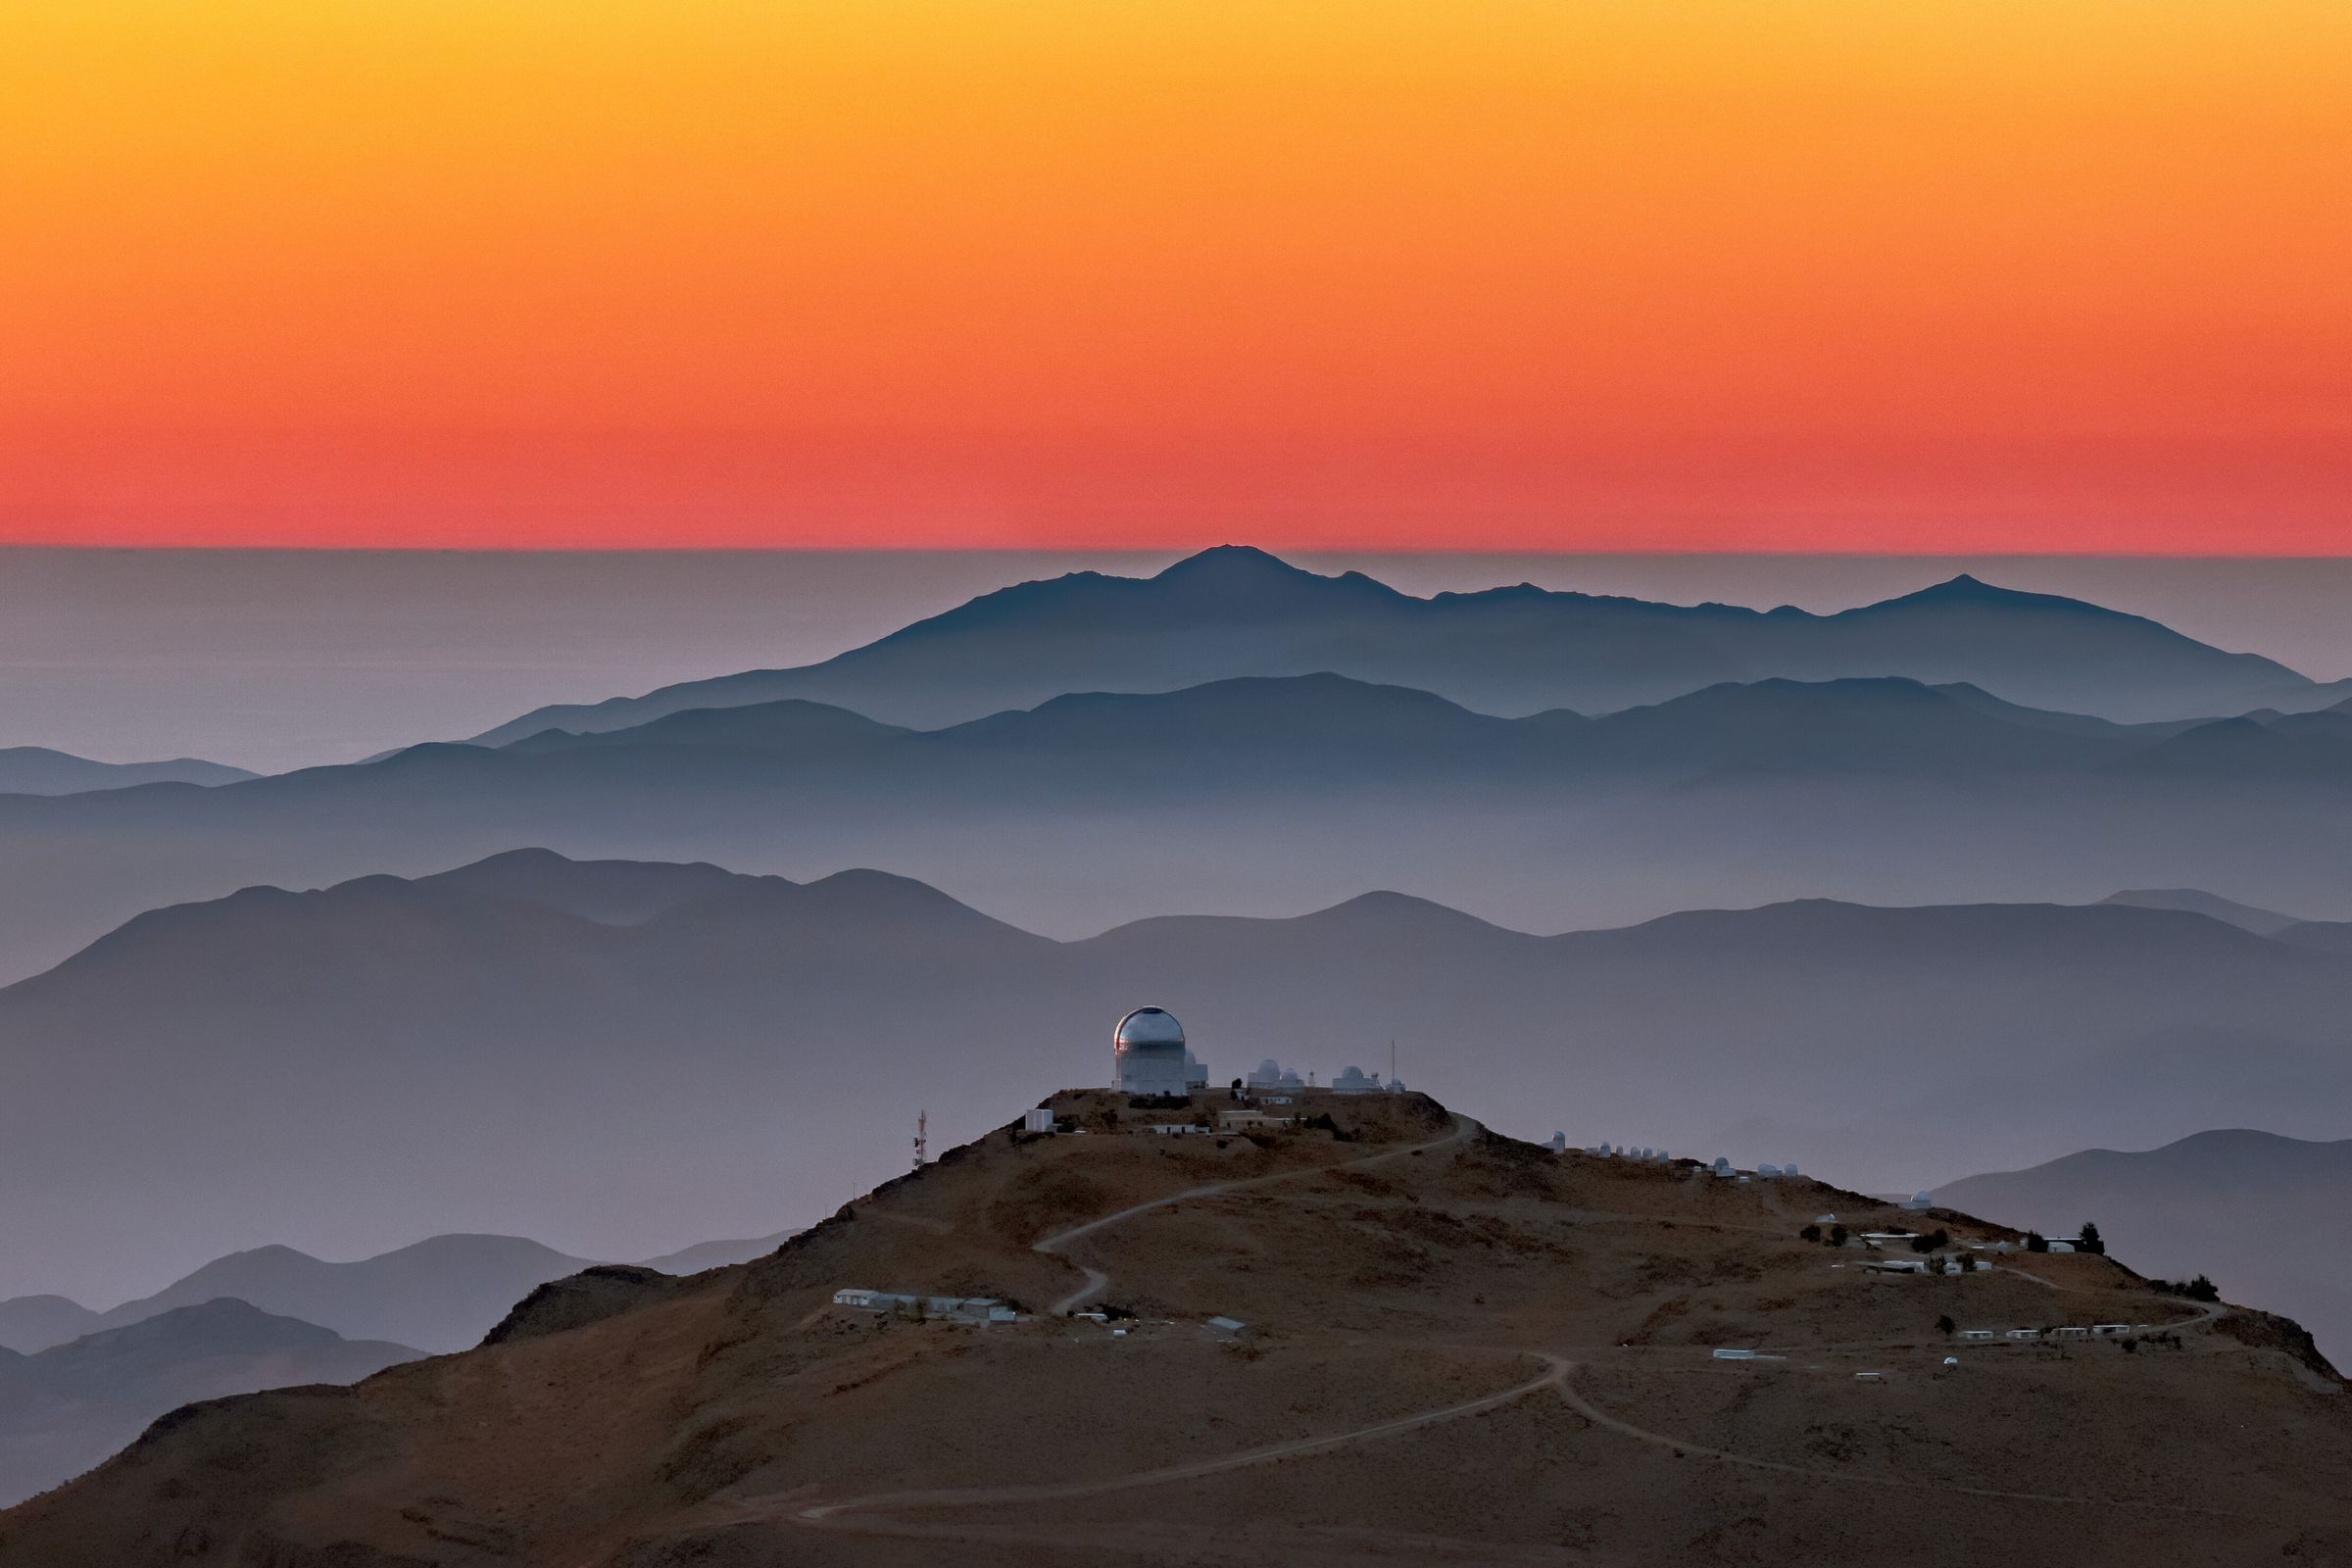 The domes of a cluster of satellites sits on a mountain ridge in the foreground. Mountain ridges rise in the background, transitioning into a orange sunset sky.